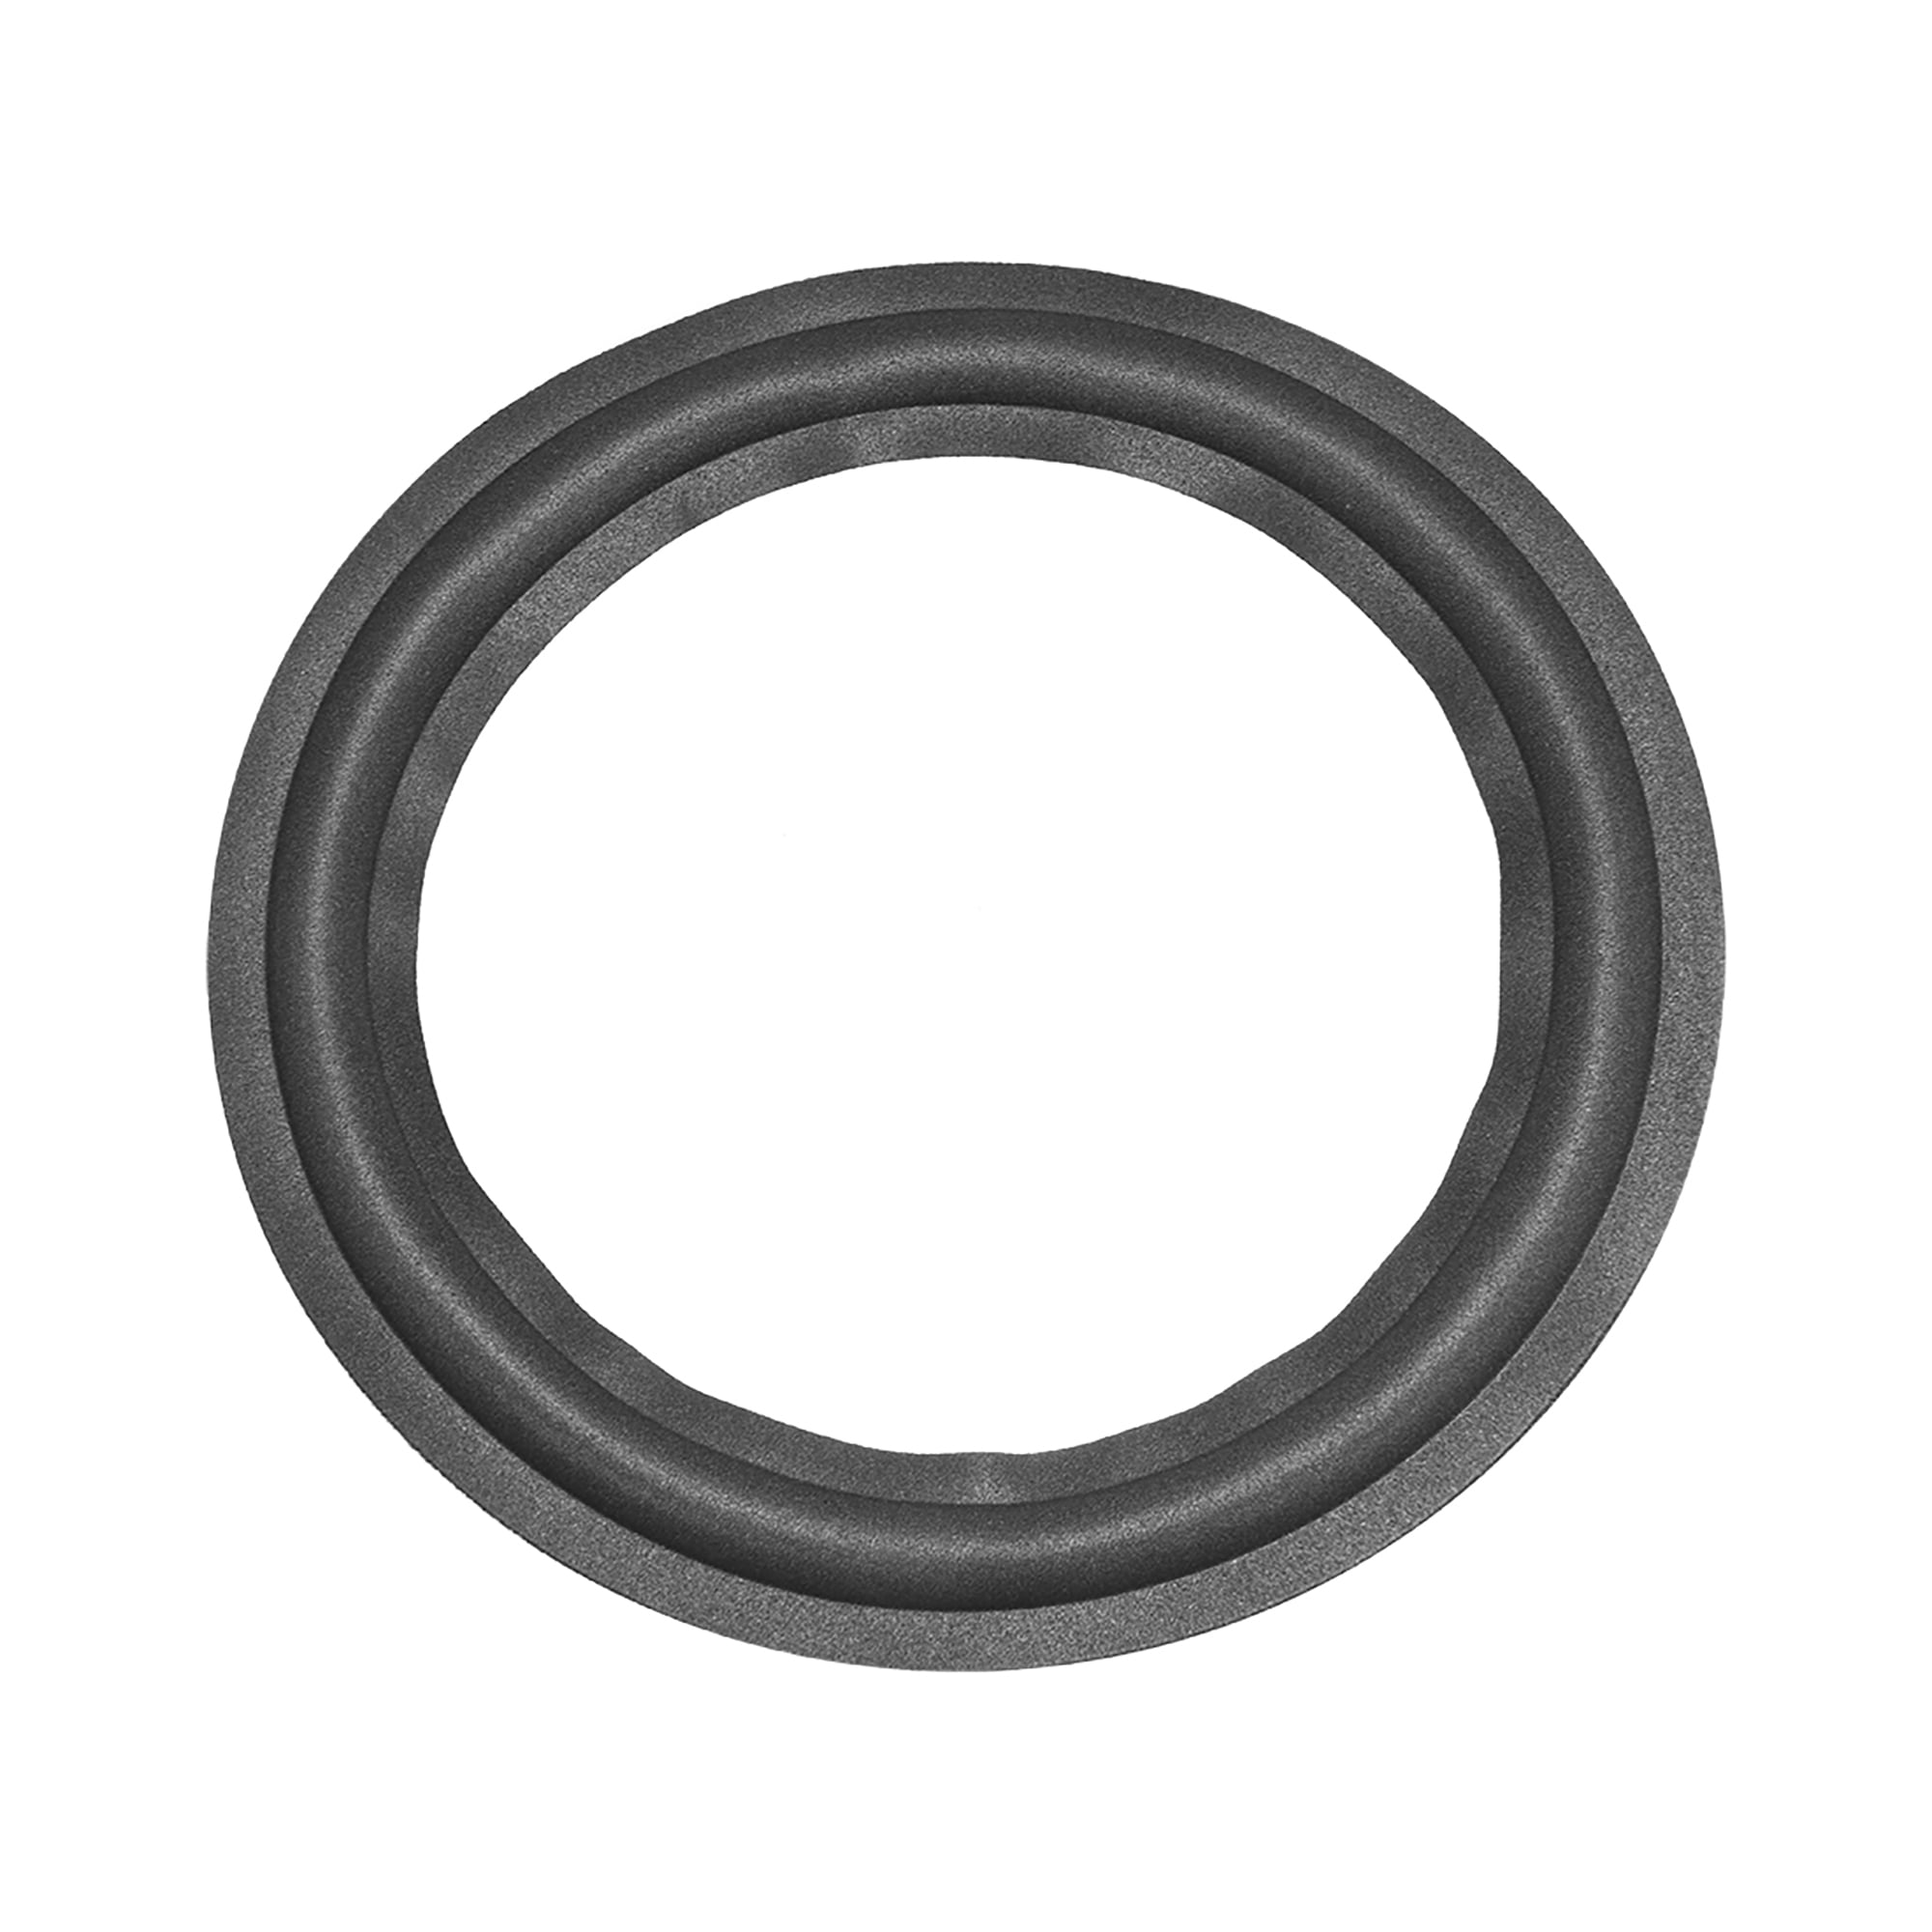 uxcell 4.5 inches 4.5 inch Speaker Foam Edge Surround Rings Replacement Parts for Speaker Repair or DIY 2pcs